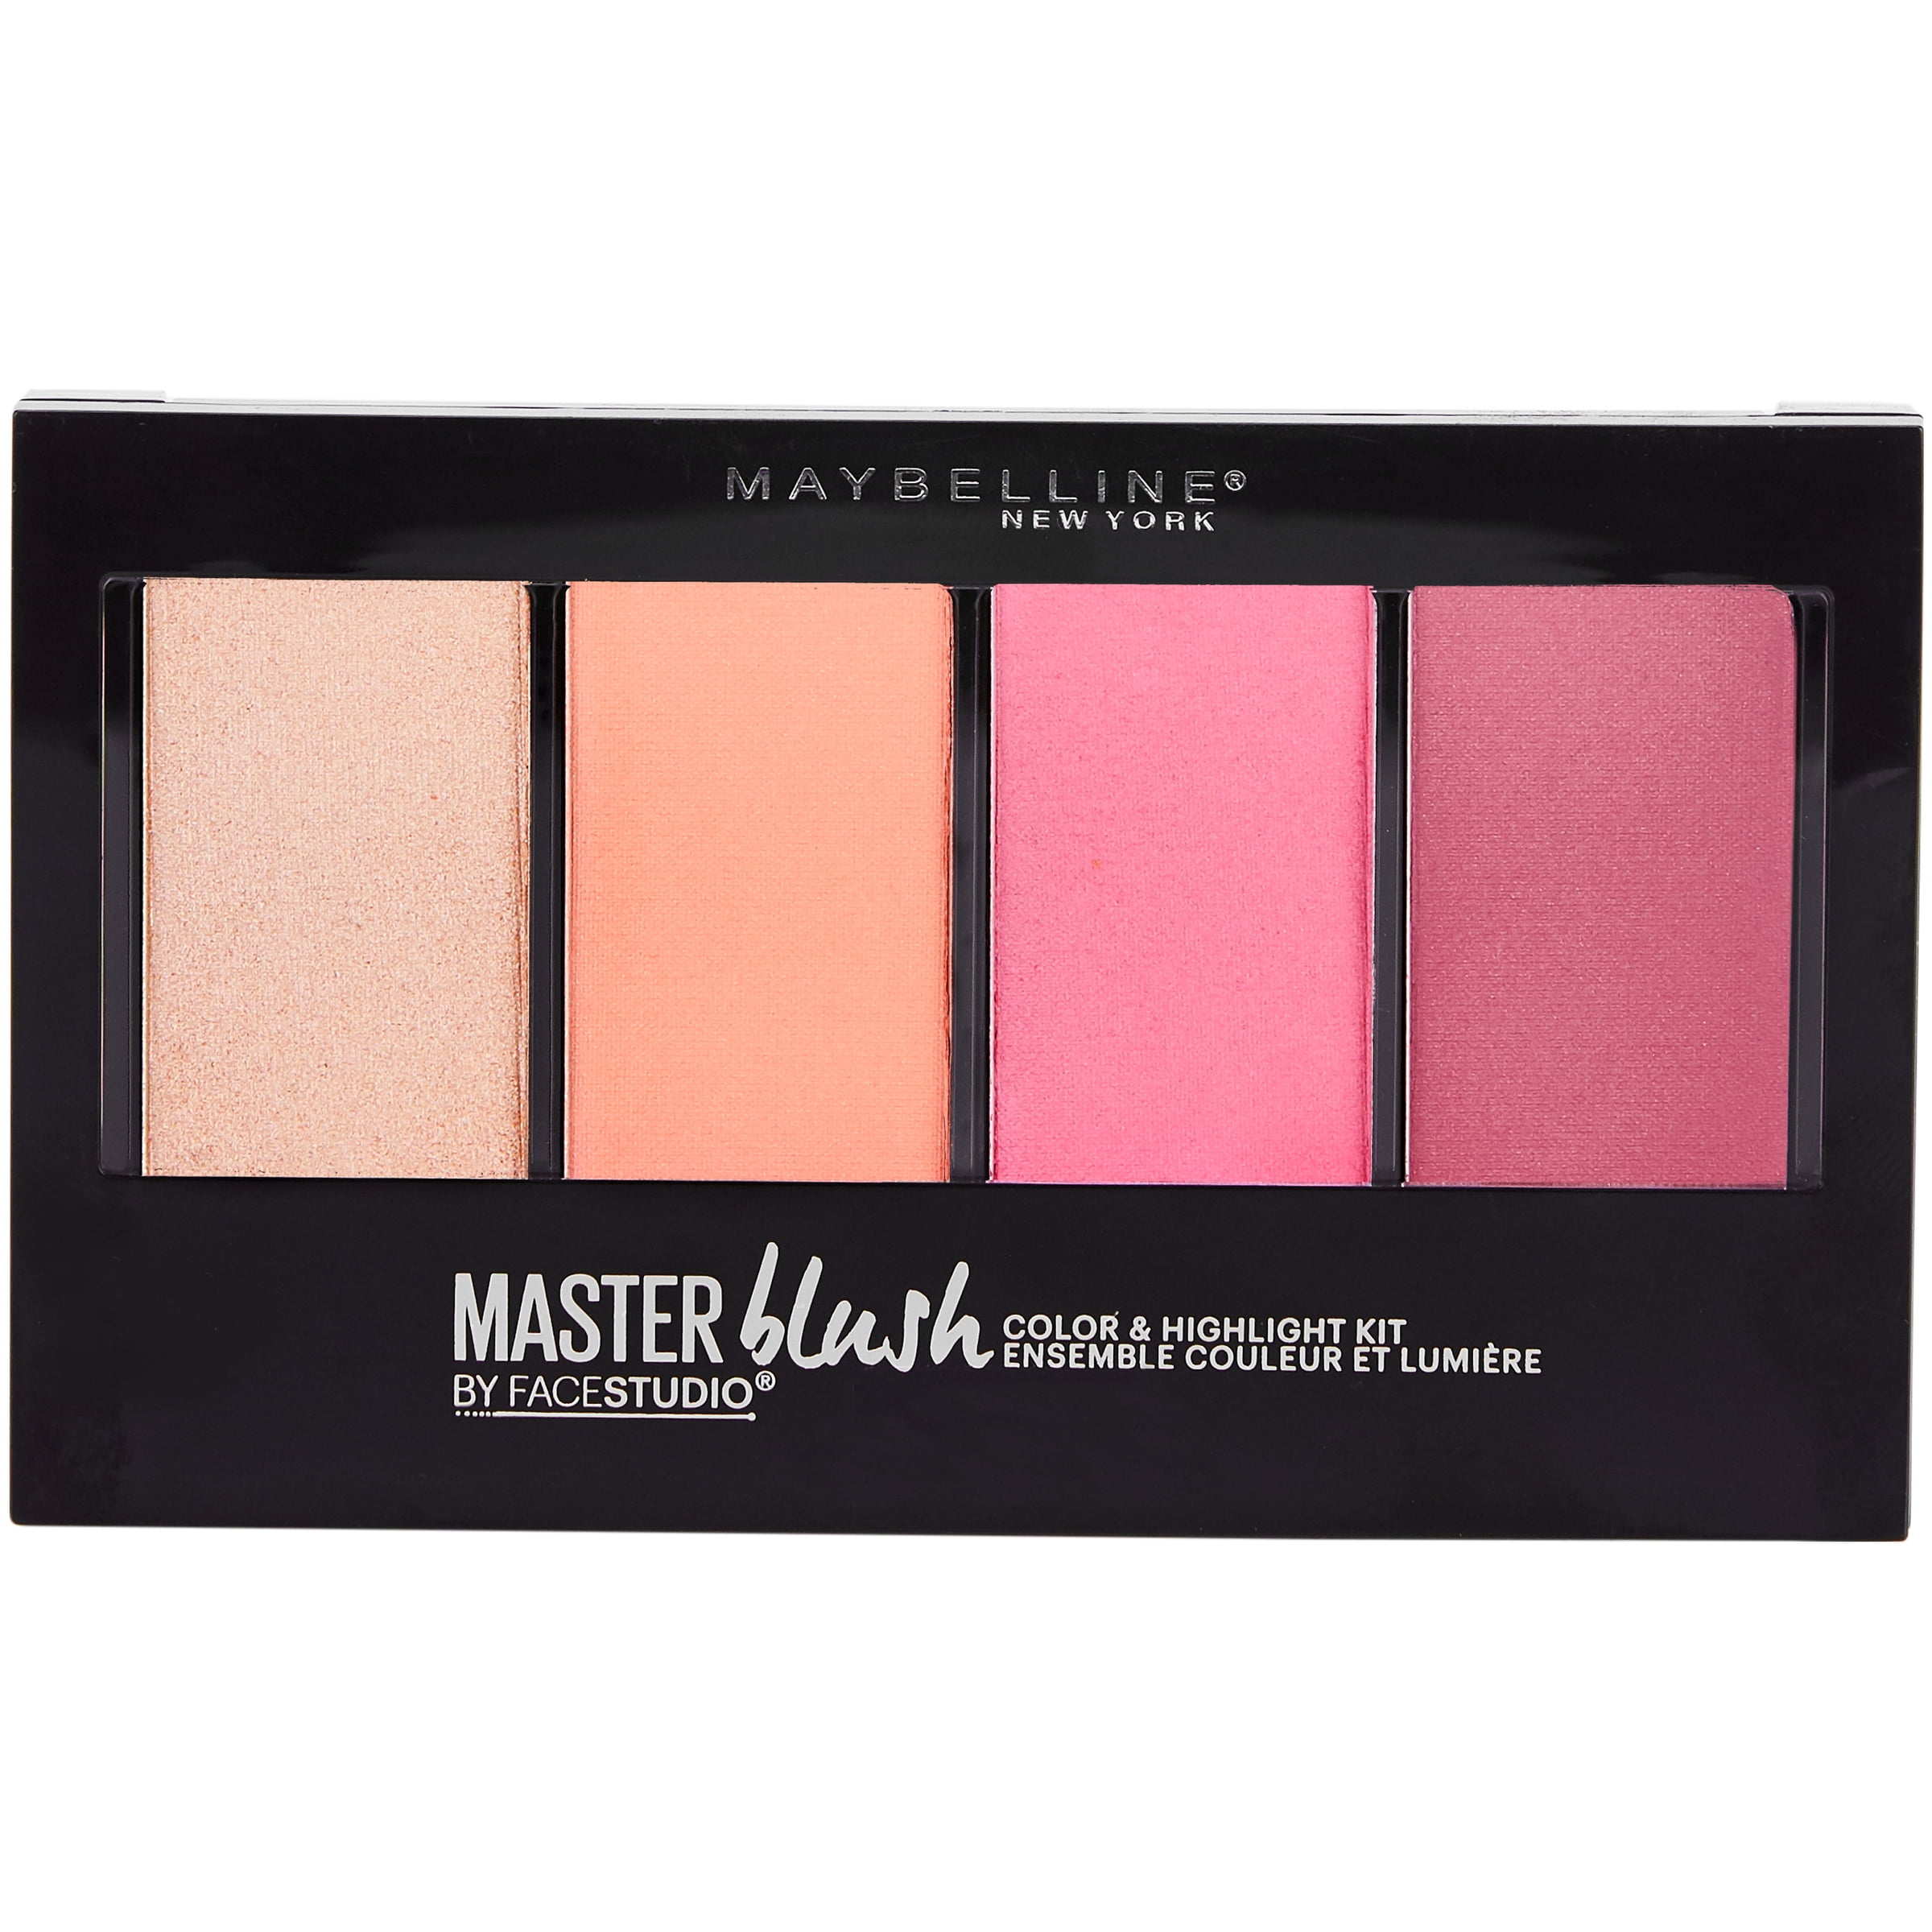 Maybelline Facestudio Master Blush and Highlight Kit, 4 colors